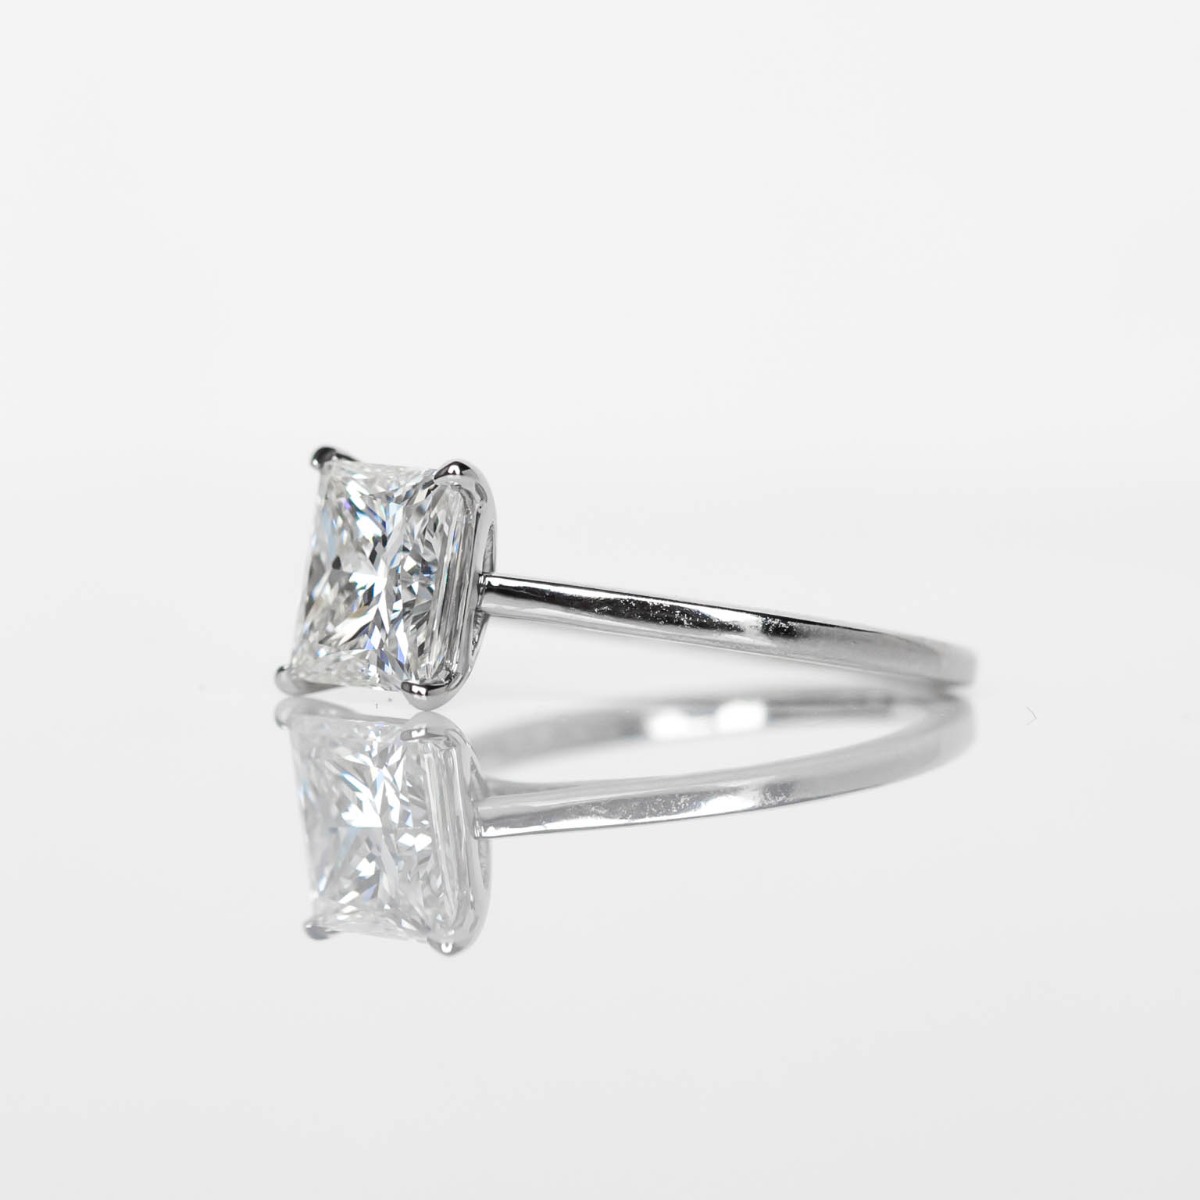 DBK Classic Solitaire Setting For Princess Cut Center Stone in White Gold